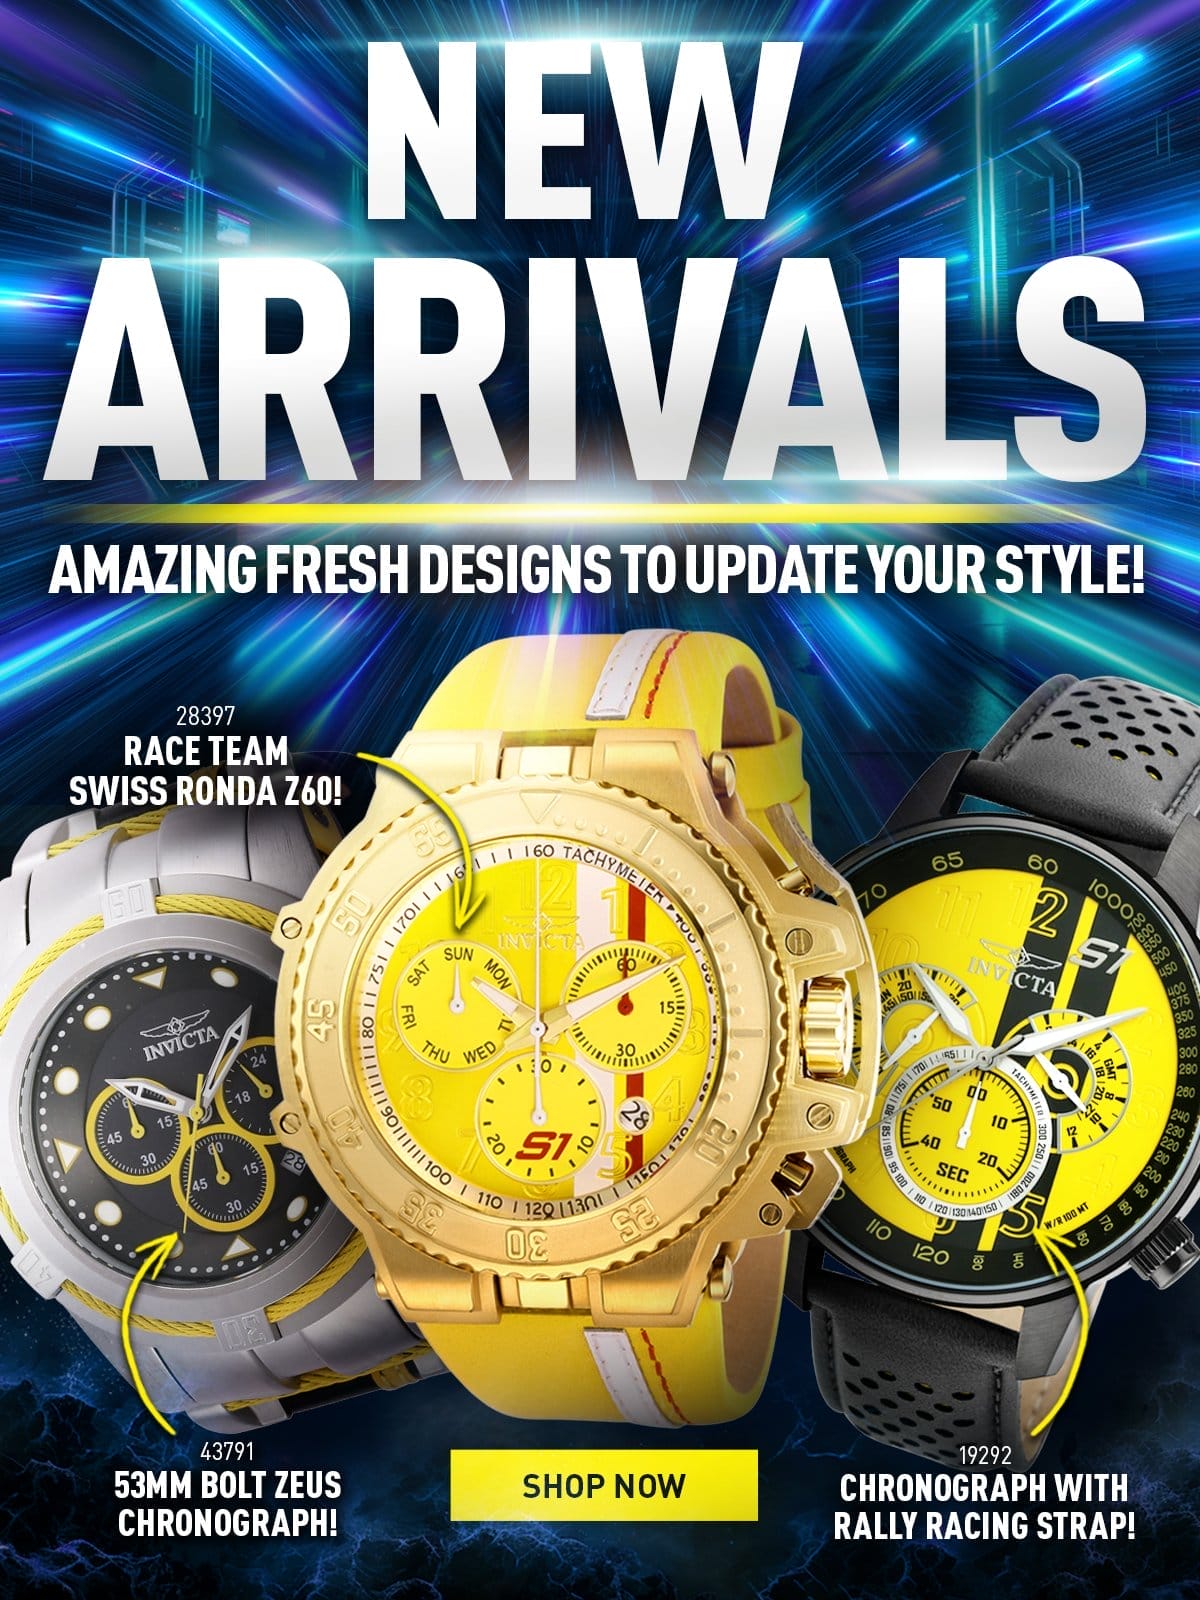 New arrivals - Amazing fresh designs to update your style!